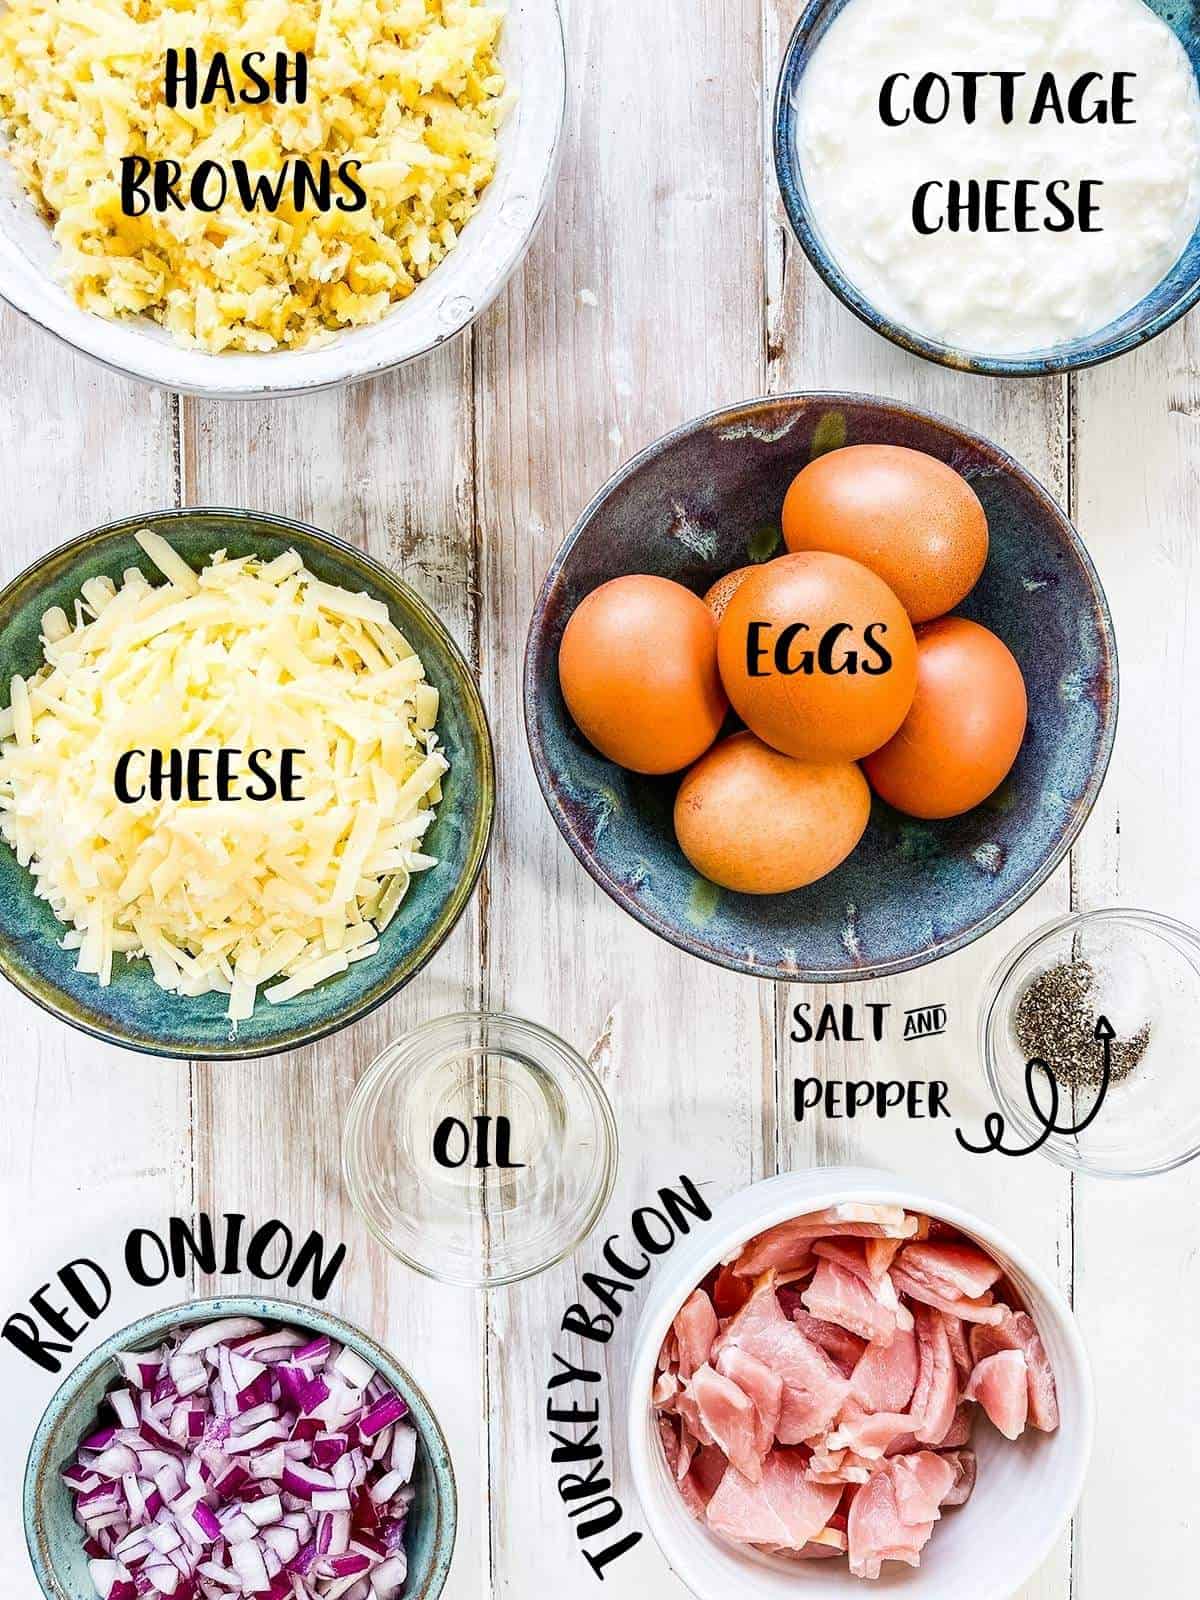 Bowls of the ingredients to make a breakfast casserole on a white table with text overlay labels.